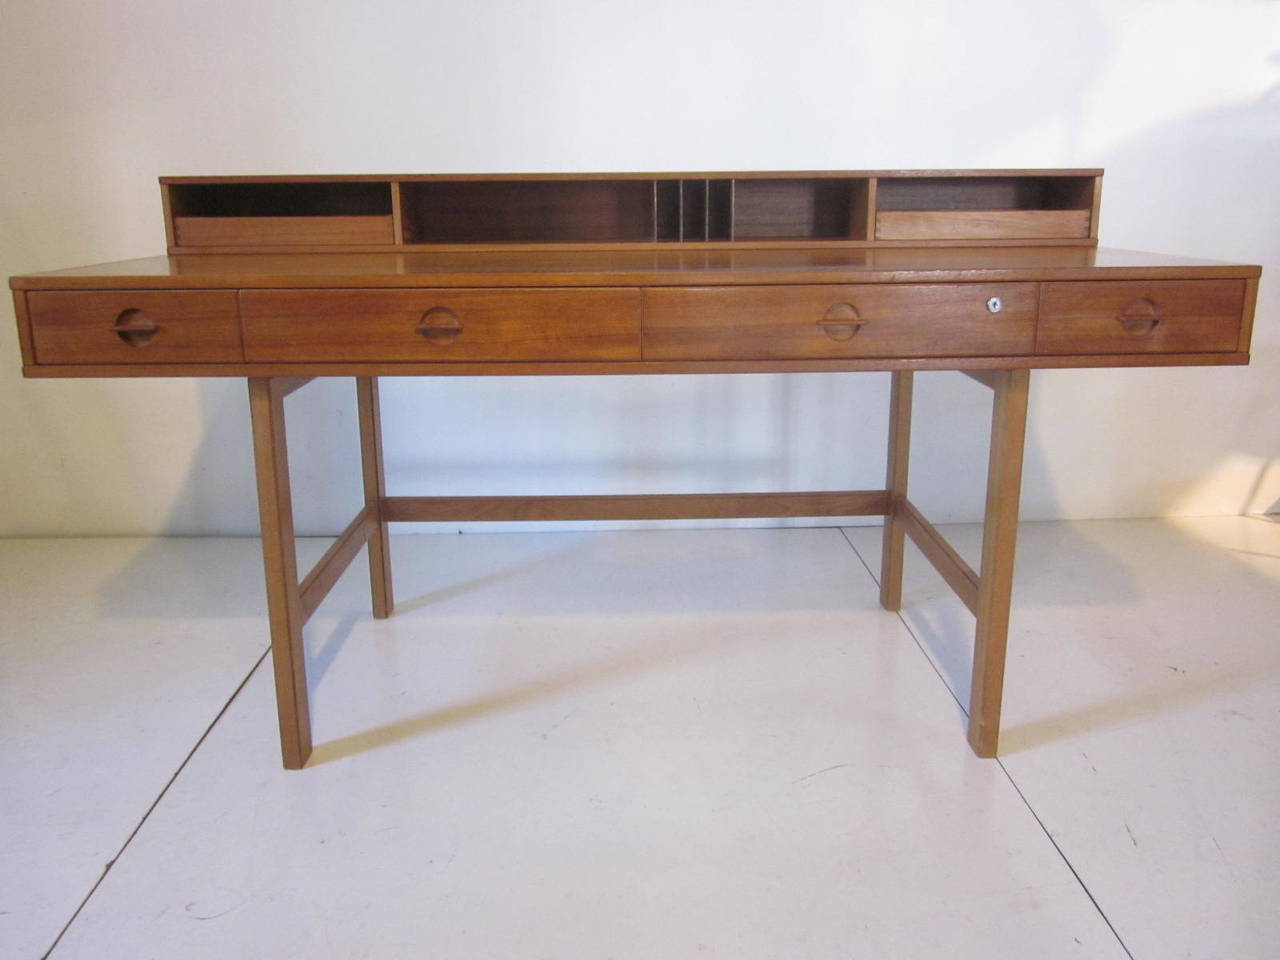 A teakwood folding file top desk with many cubbies with two drawers and four drawers to the front, the back side has a bit of storage also, sitting on removable legs for ease of moving and set up. The best part of this design is that the file area